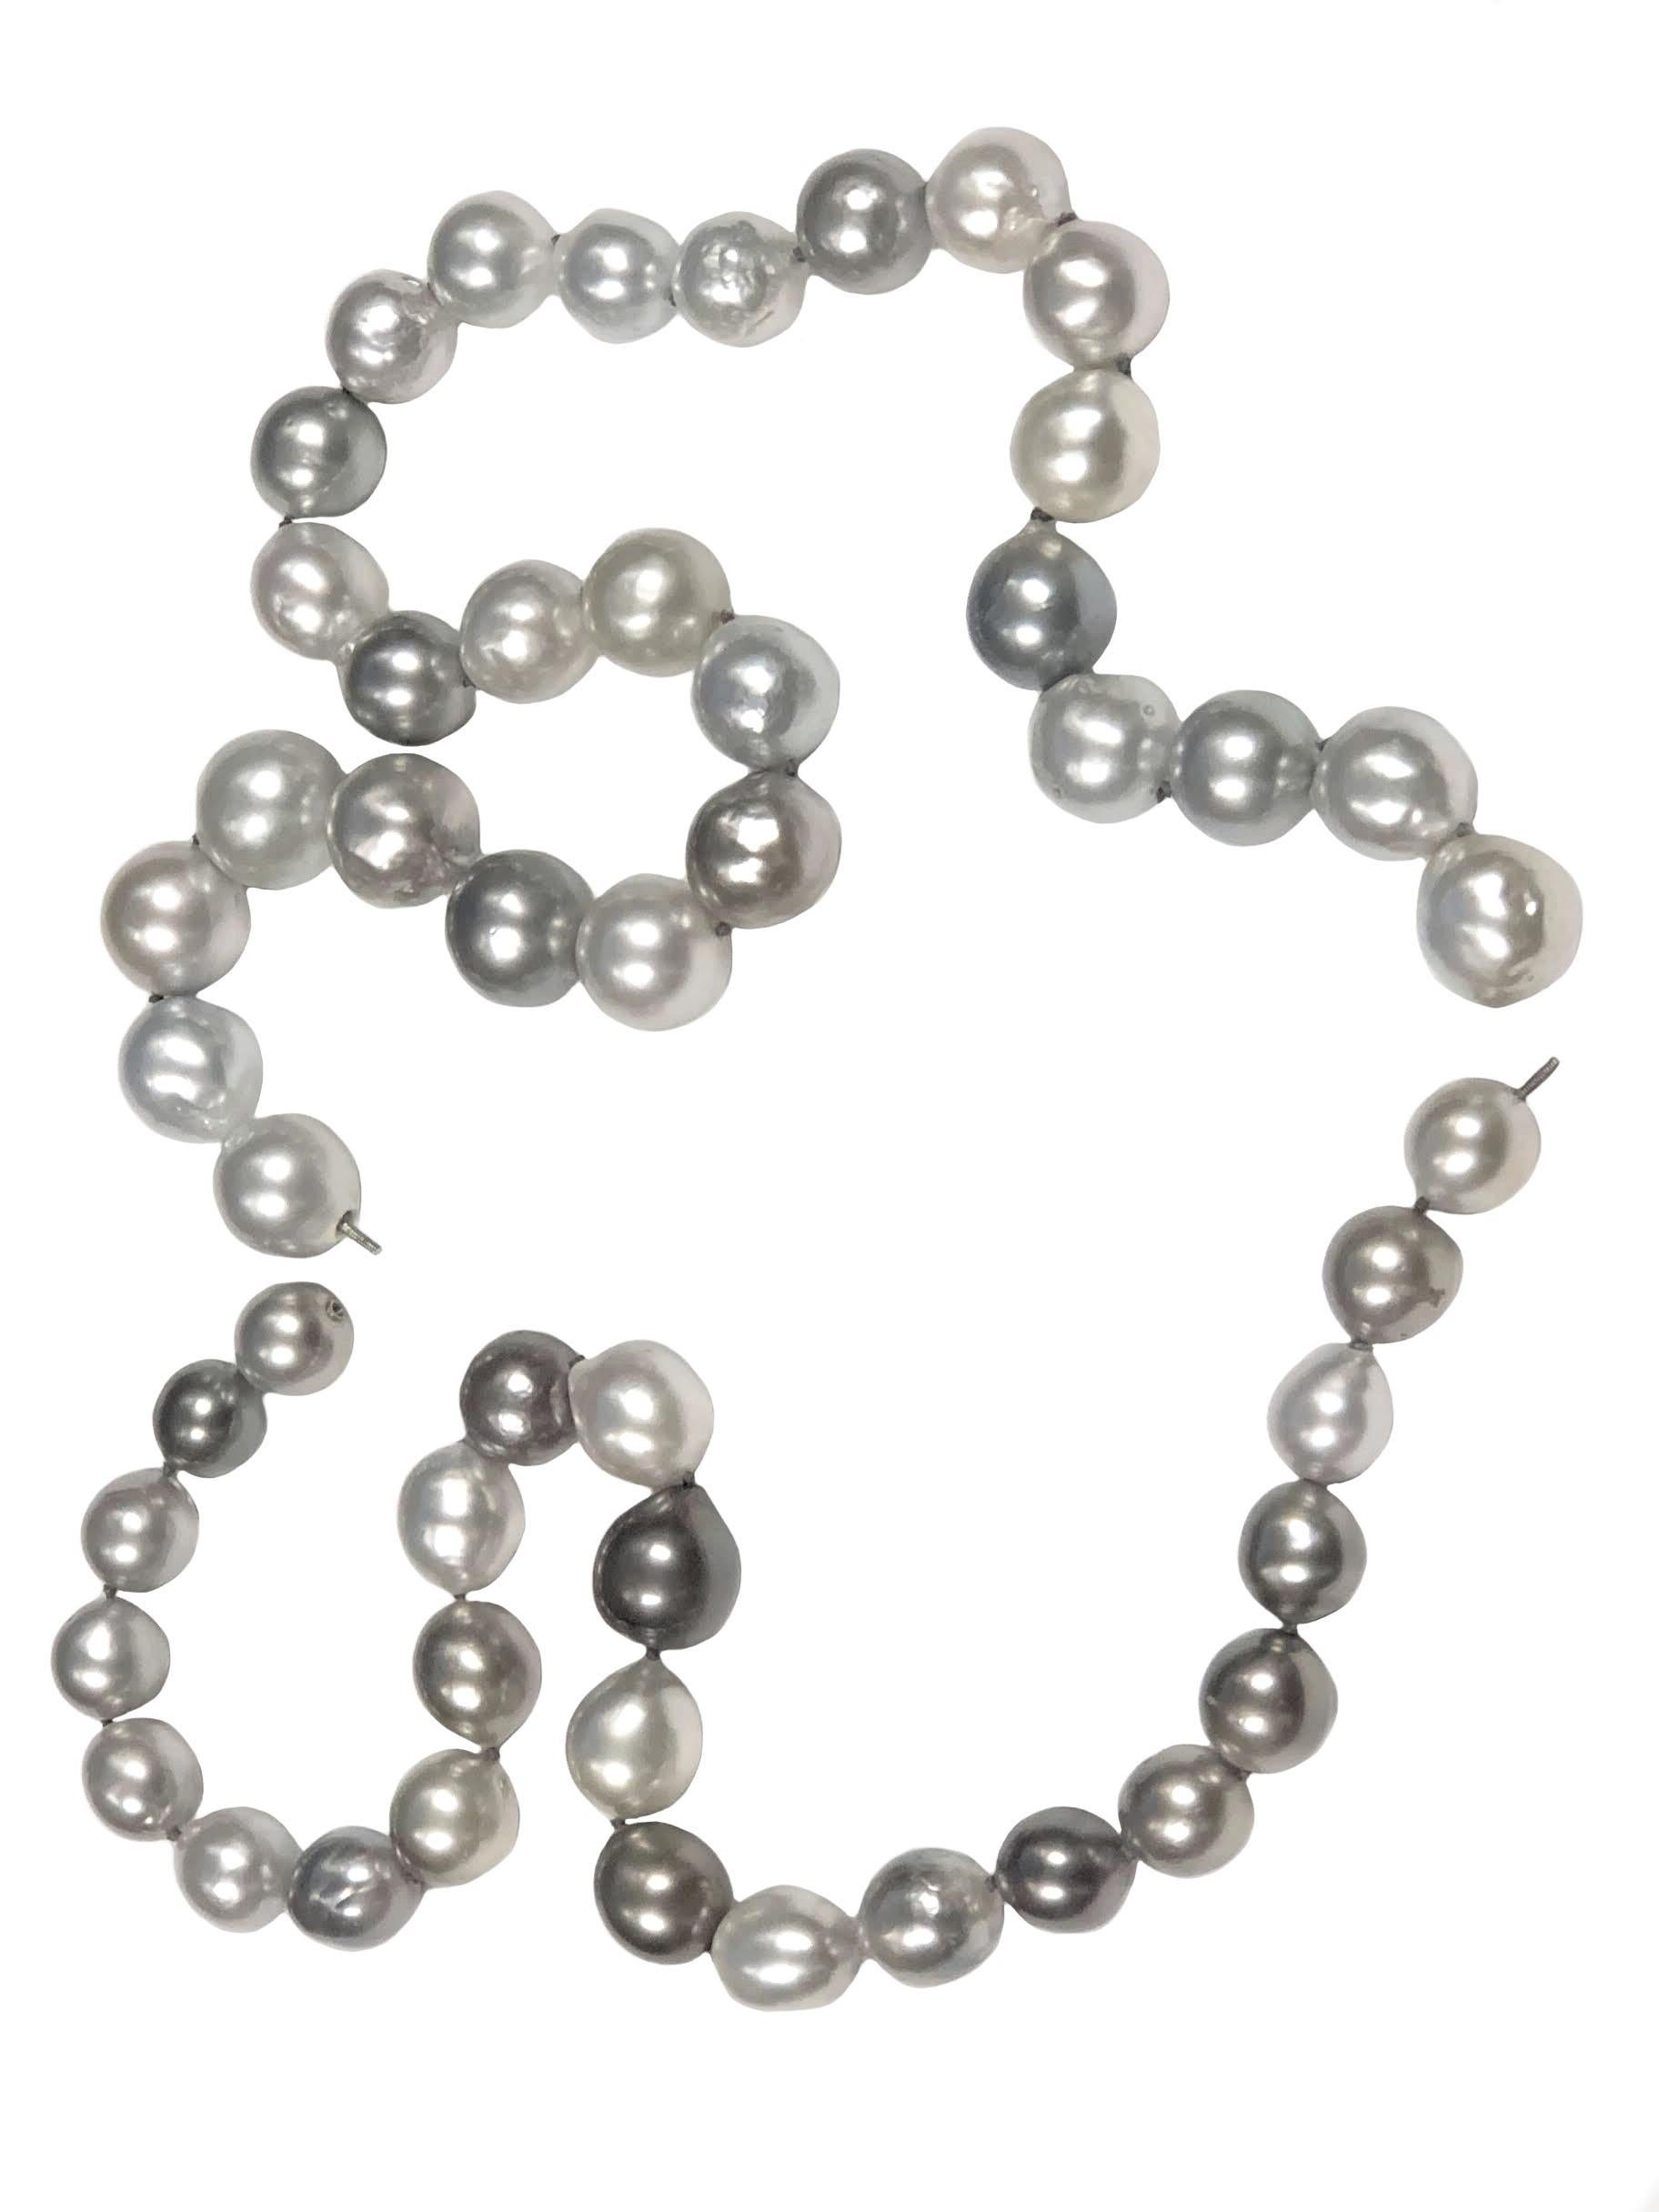 Oval Cut South Sea Gray Tahitian Large Baroque Pearls Necklace or 2 Chokers For Sale